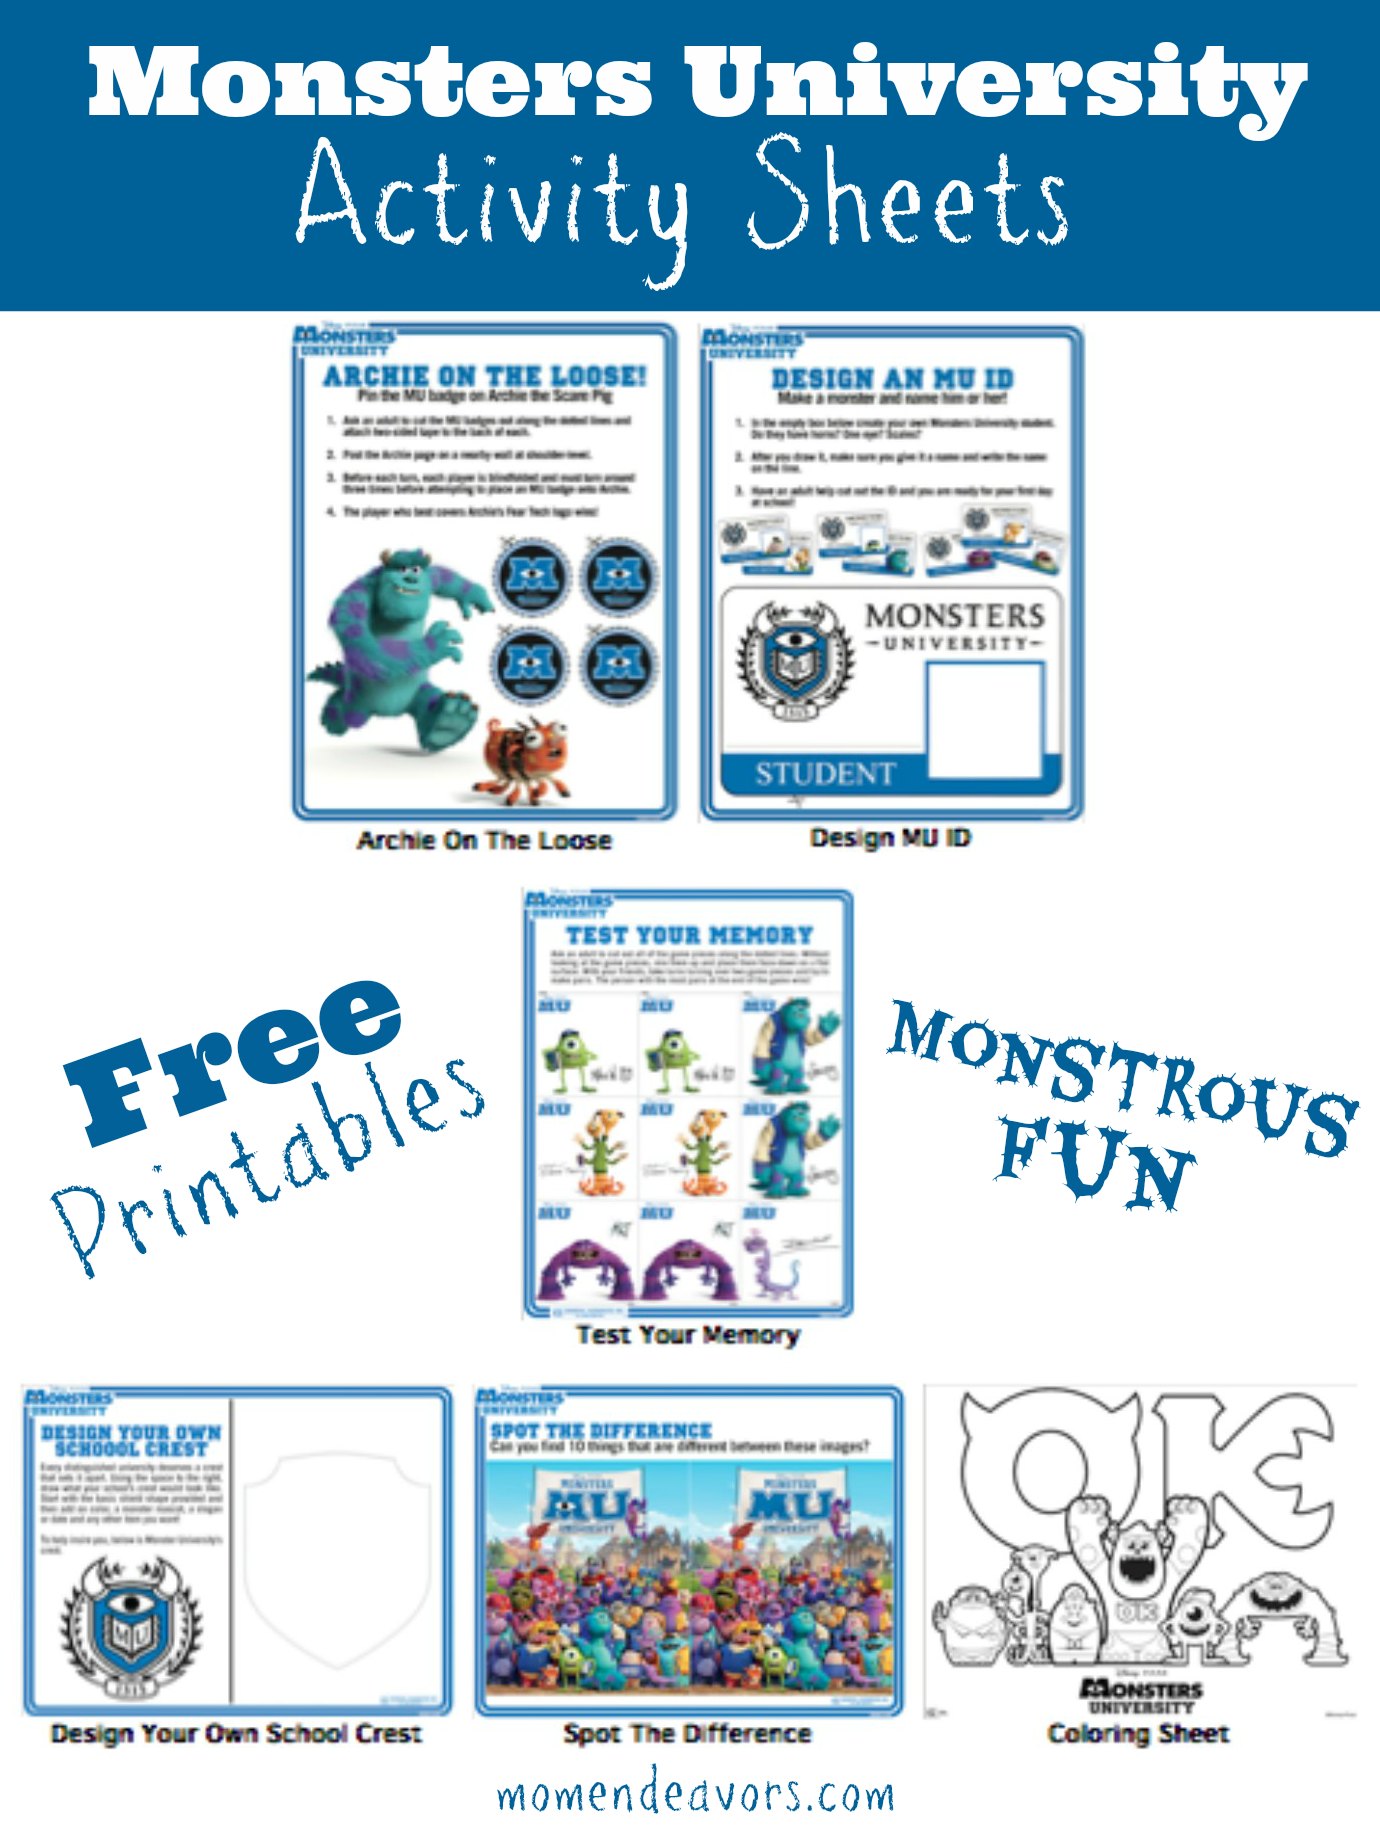 Monsters University Activity Sheets